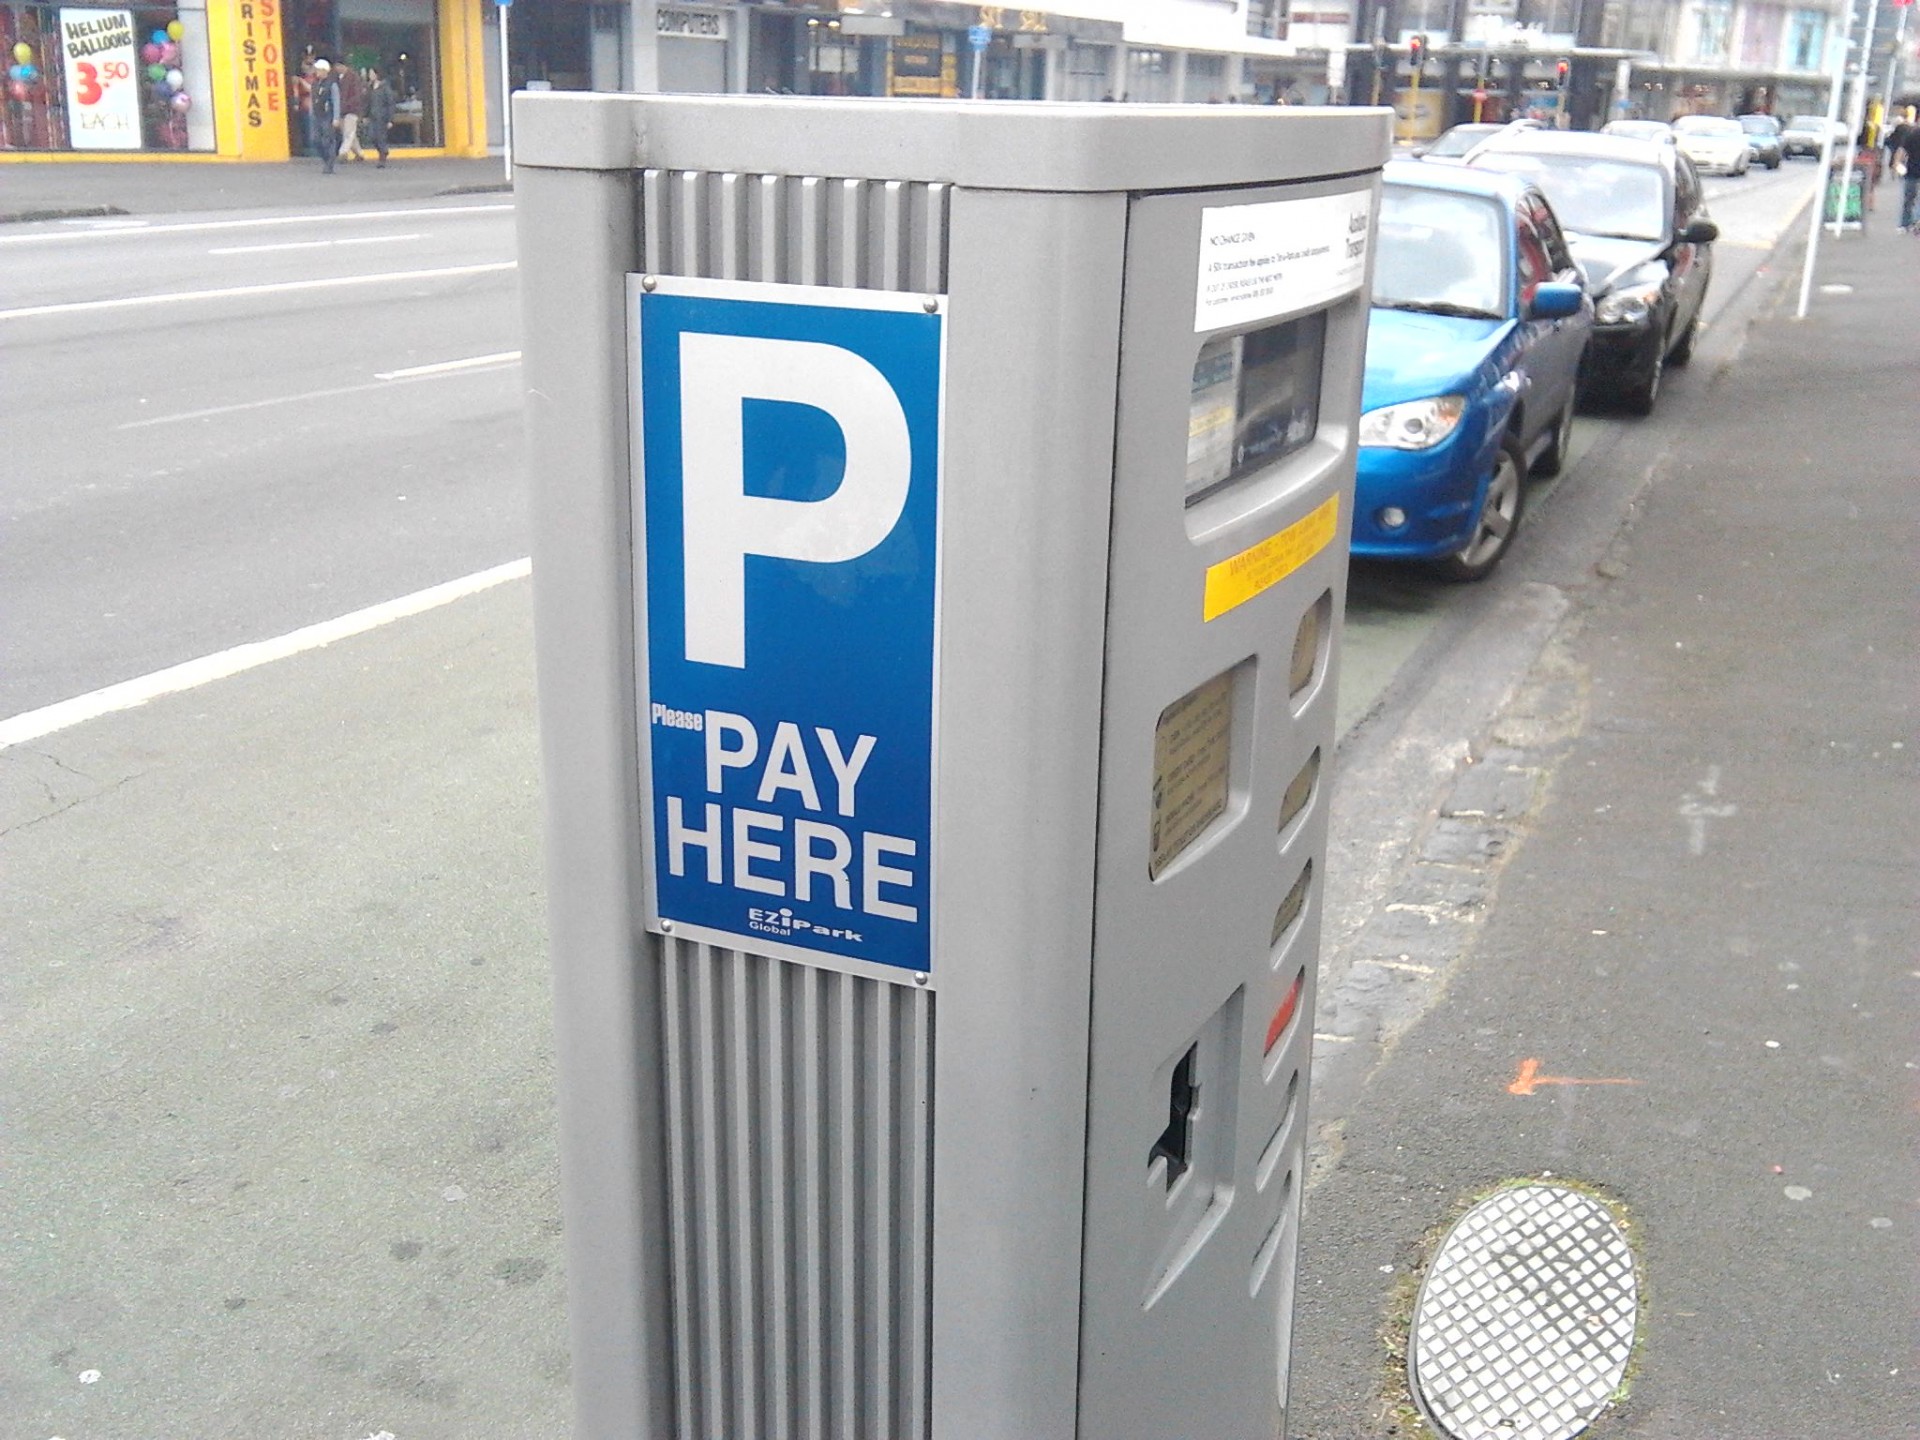 Cities in America Are Getting Smarter About Parking Solutions